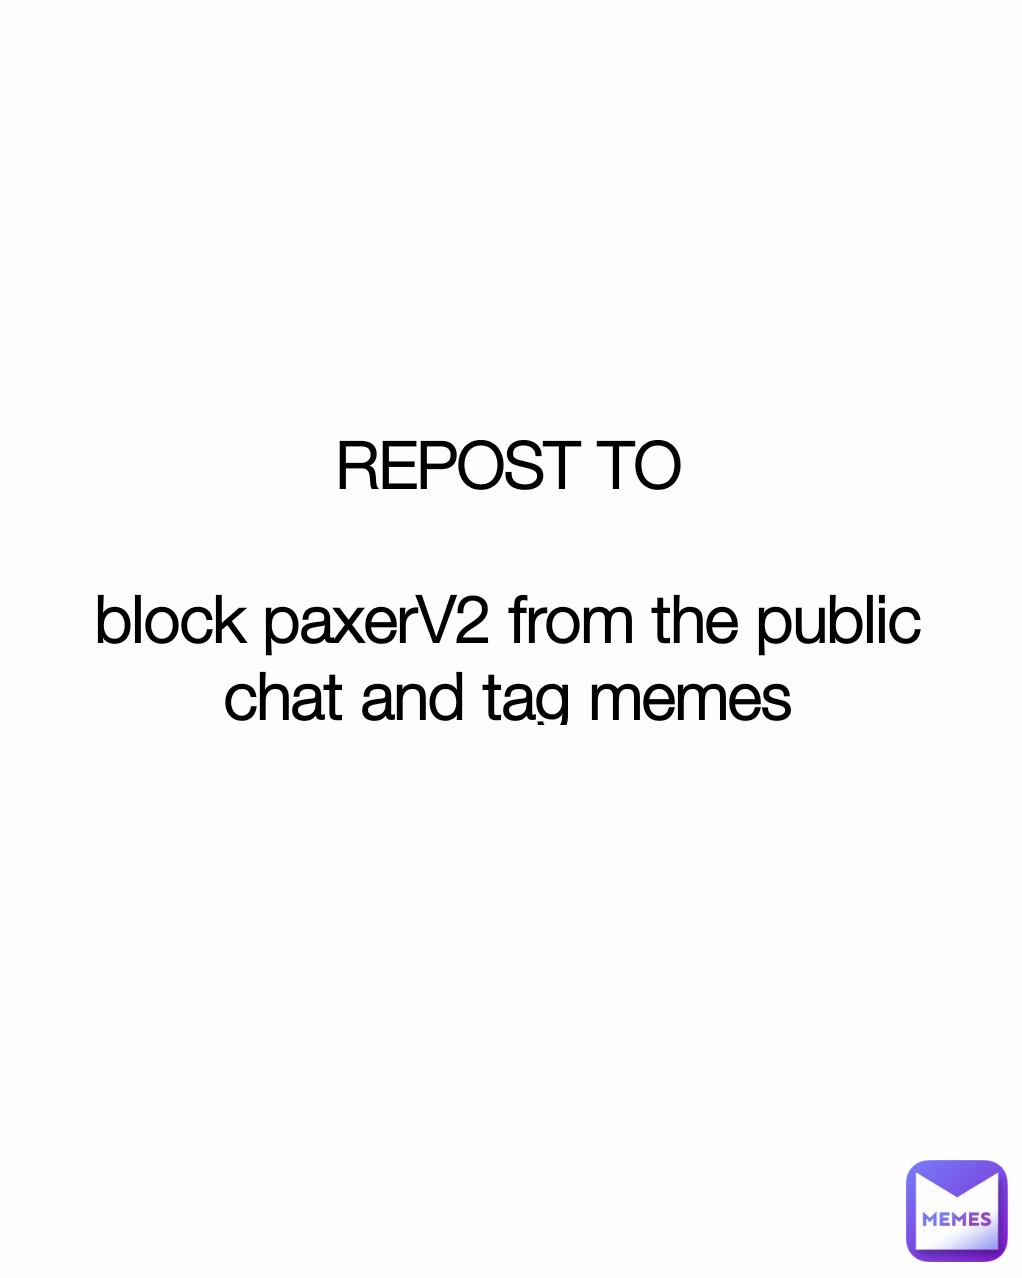 REPOST TO

block paxerV2 from the public chat and tag memes